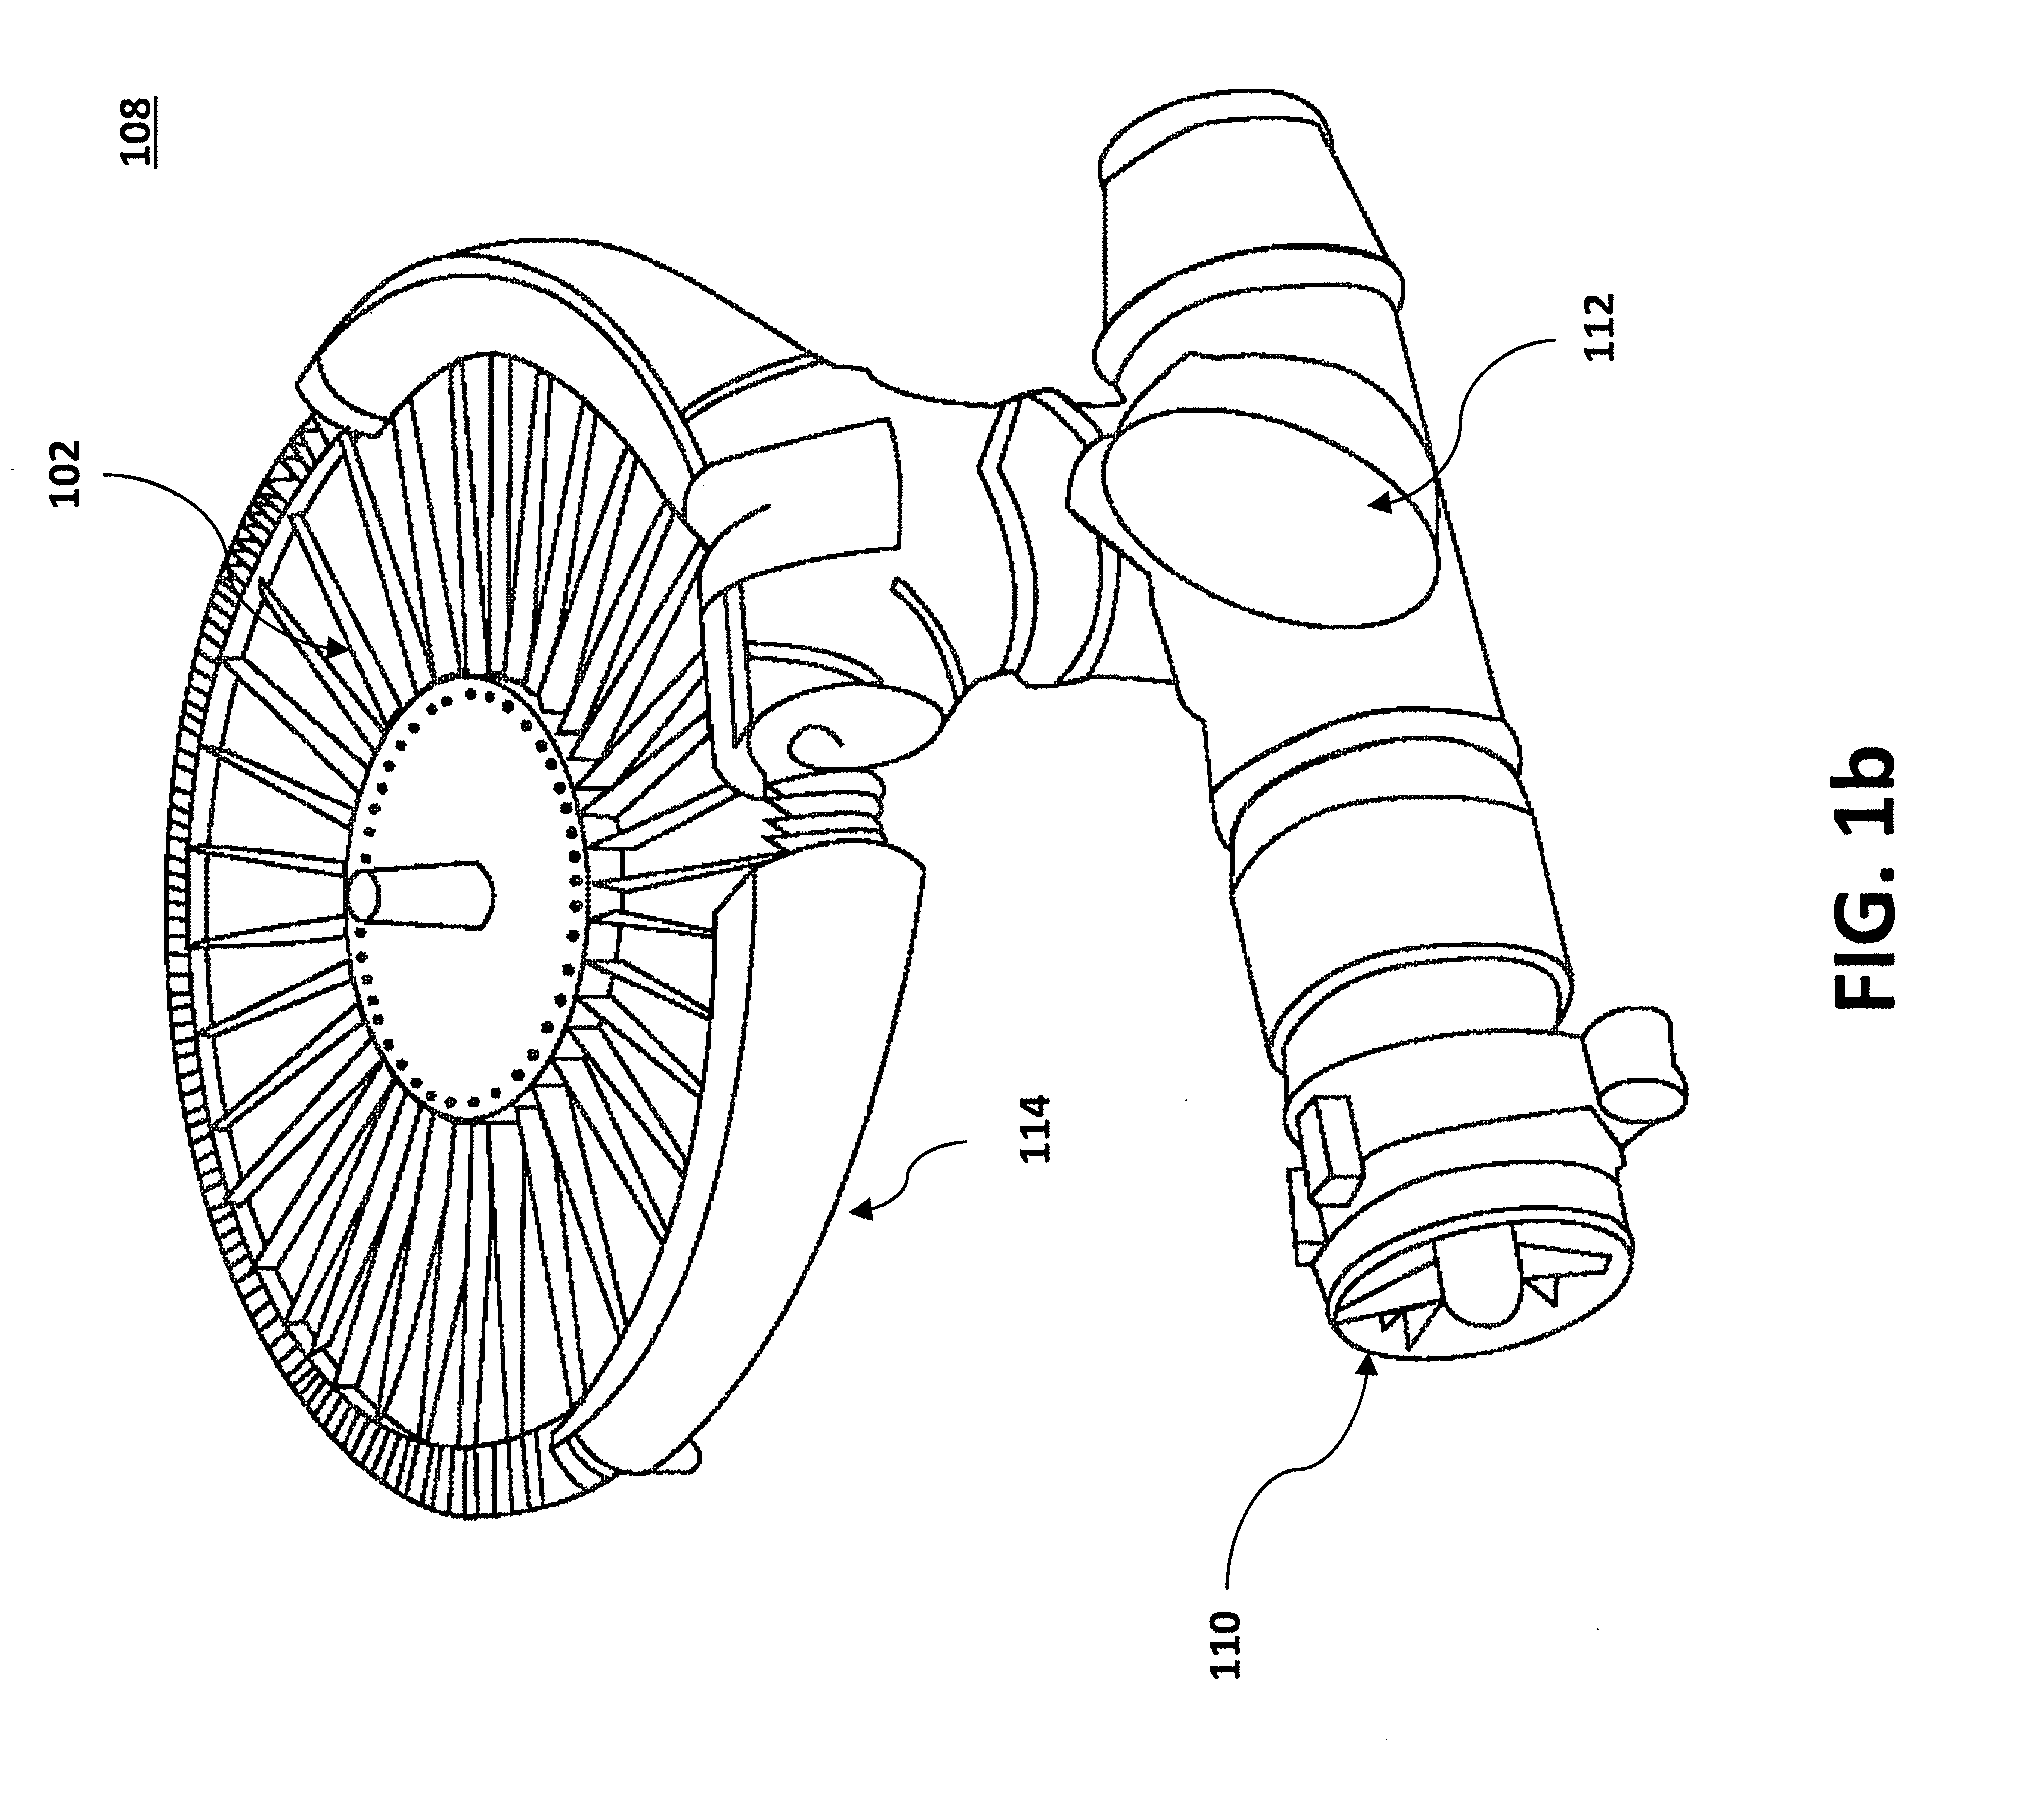 System and method for improving transition lift-fan performance